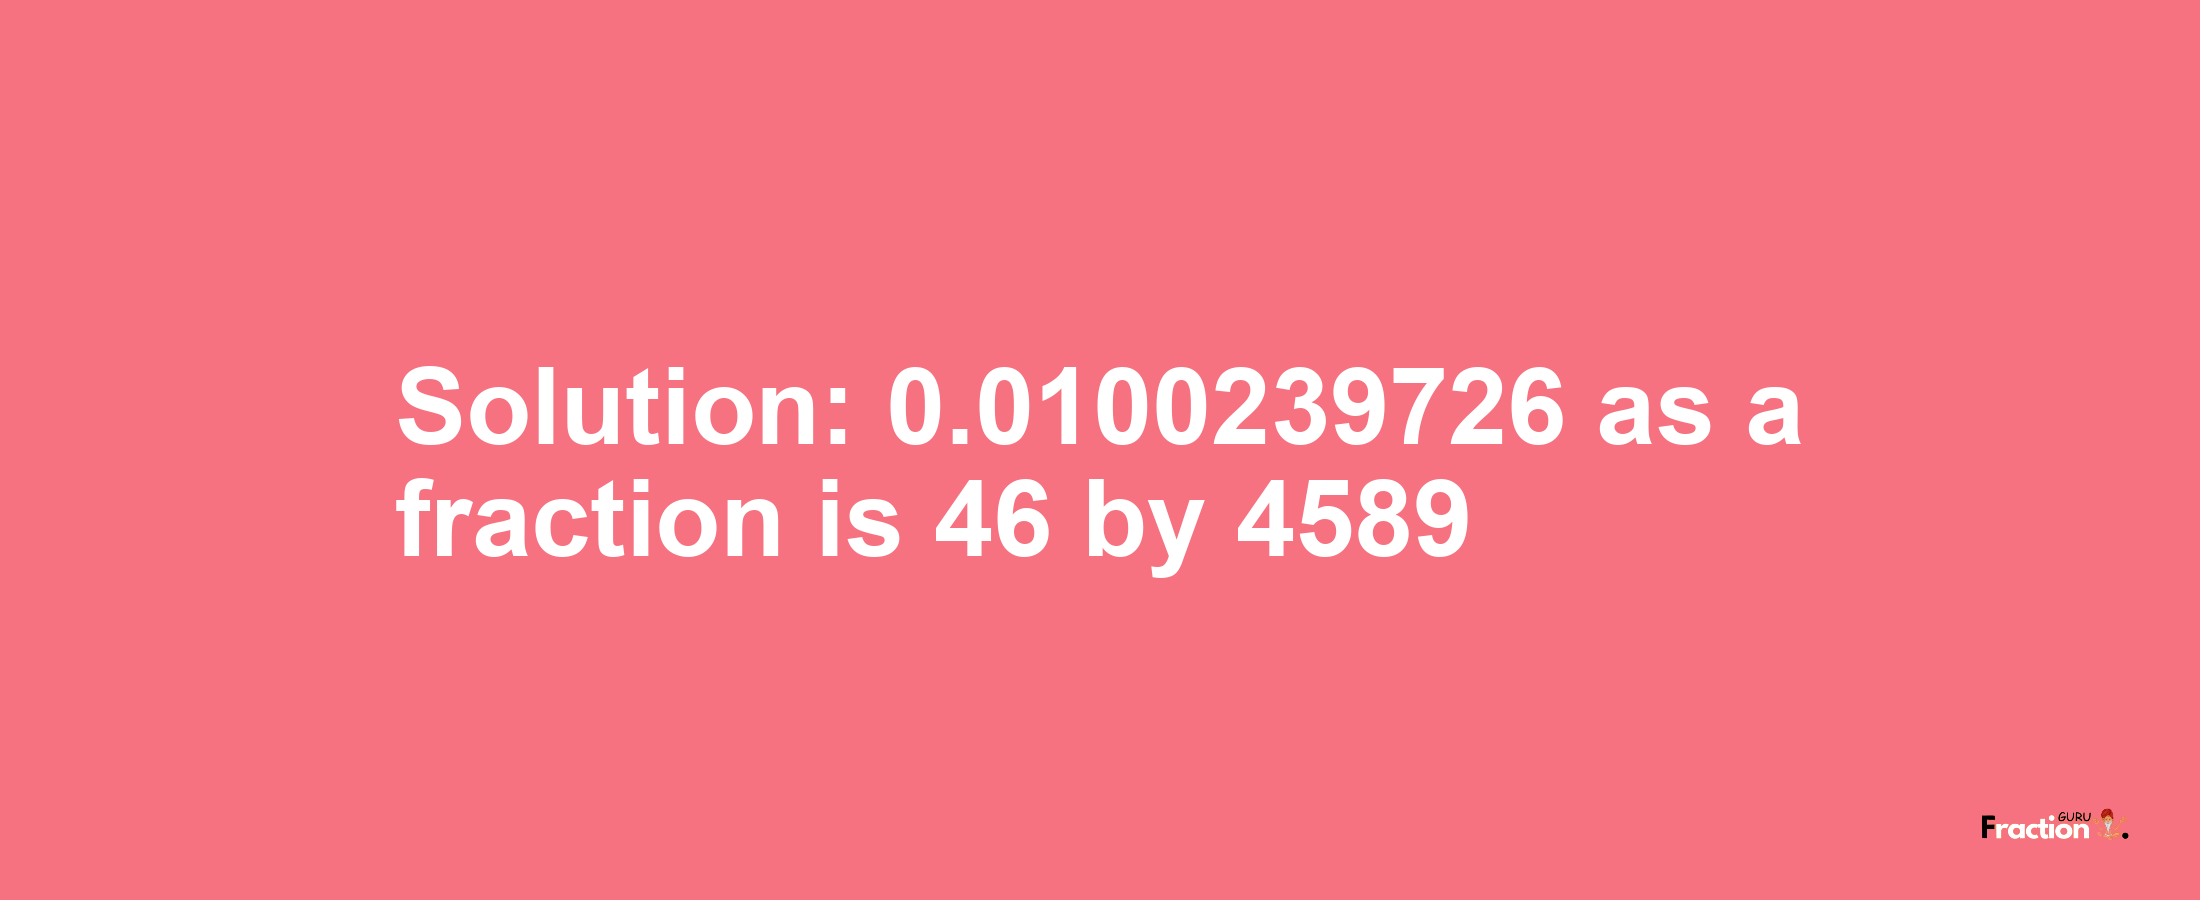 Solution:0.0100239726 as a fraction is 46/4589